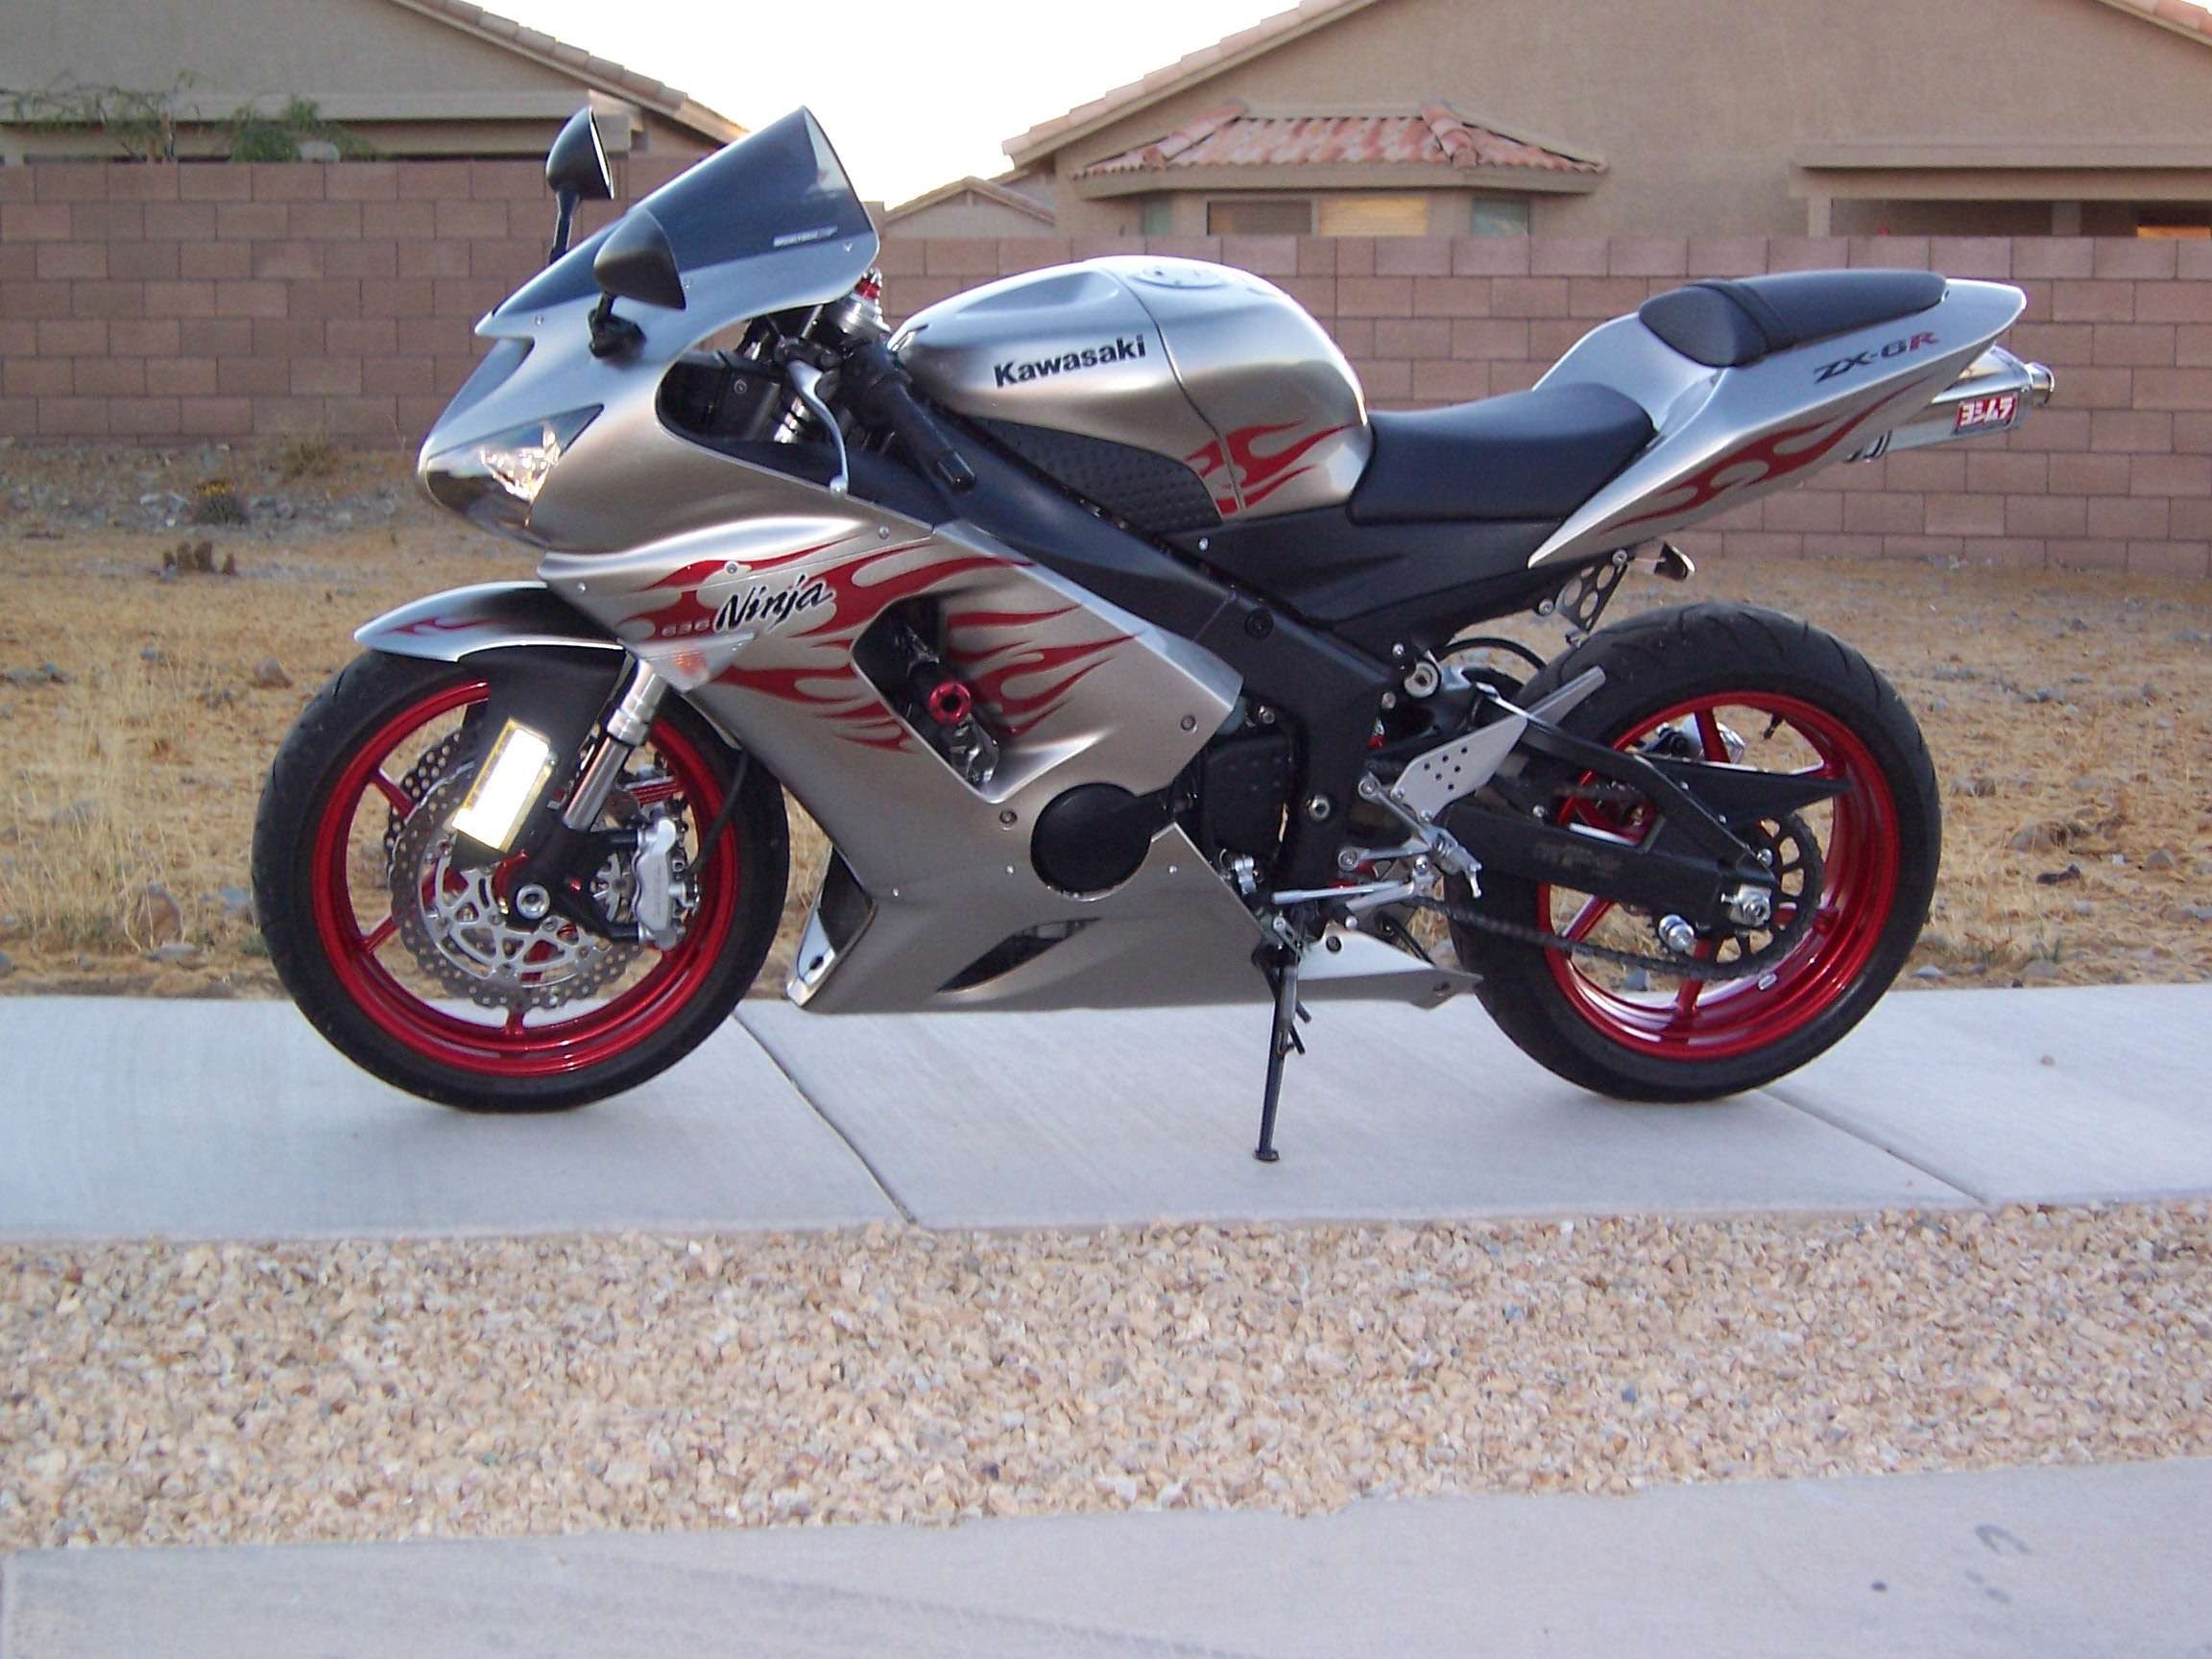 i was wondering where i can the decals of the flames on the 06 zx6r